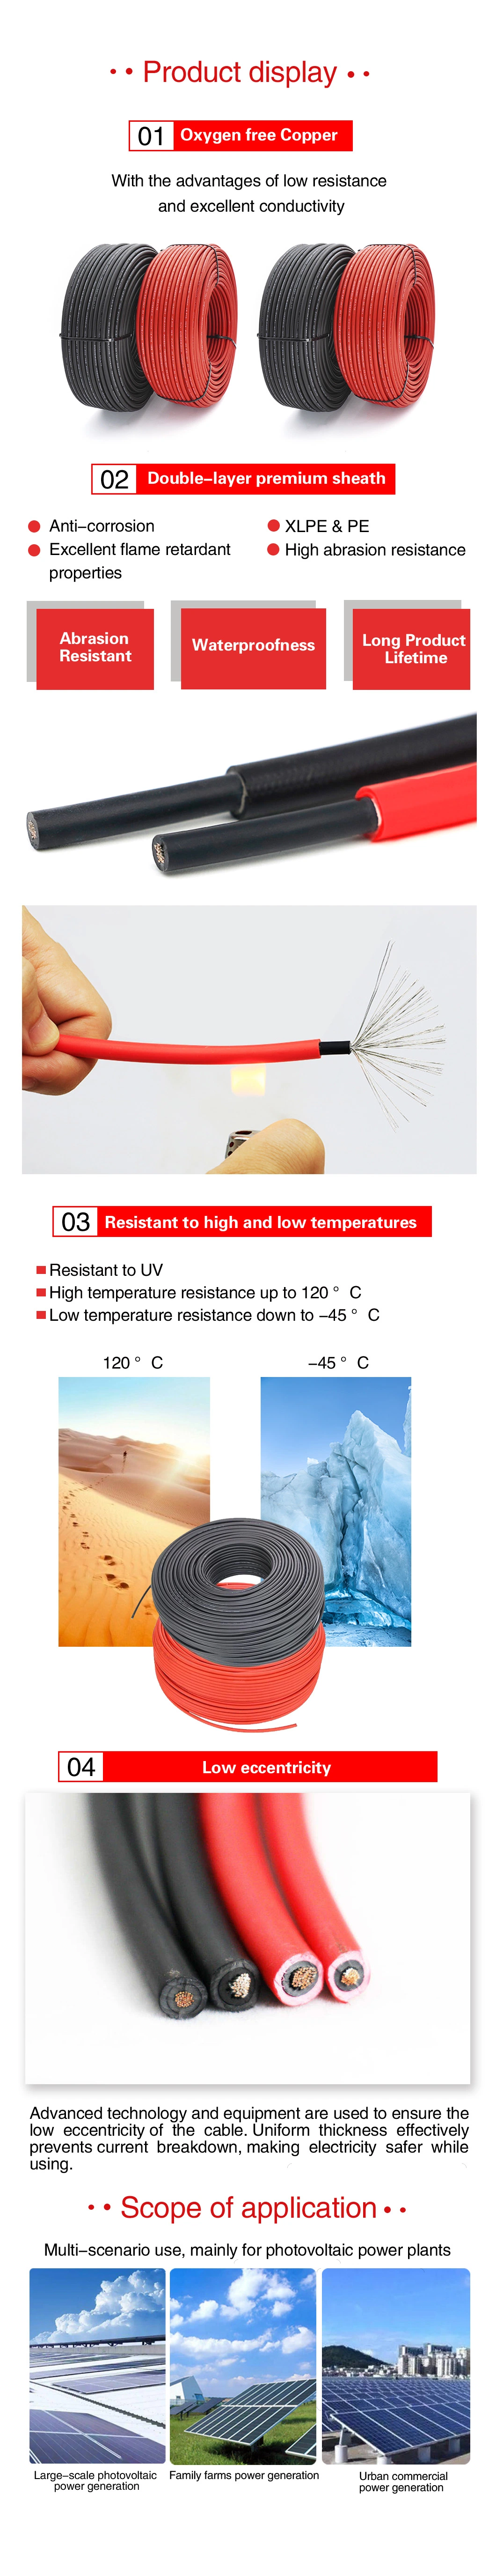 Red/Black PV Cable TUV Approval UV-Protected 6mm Solar Cable